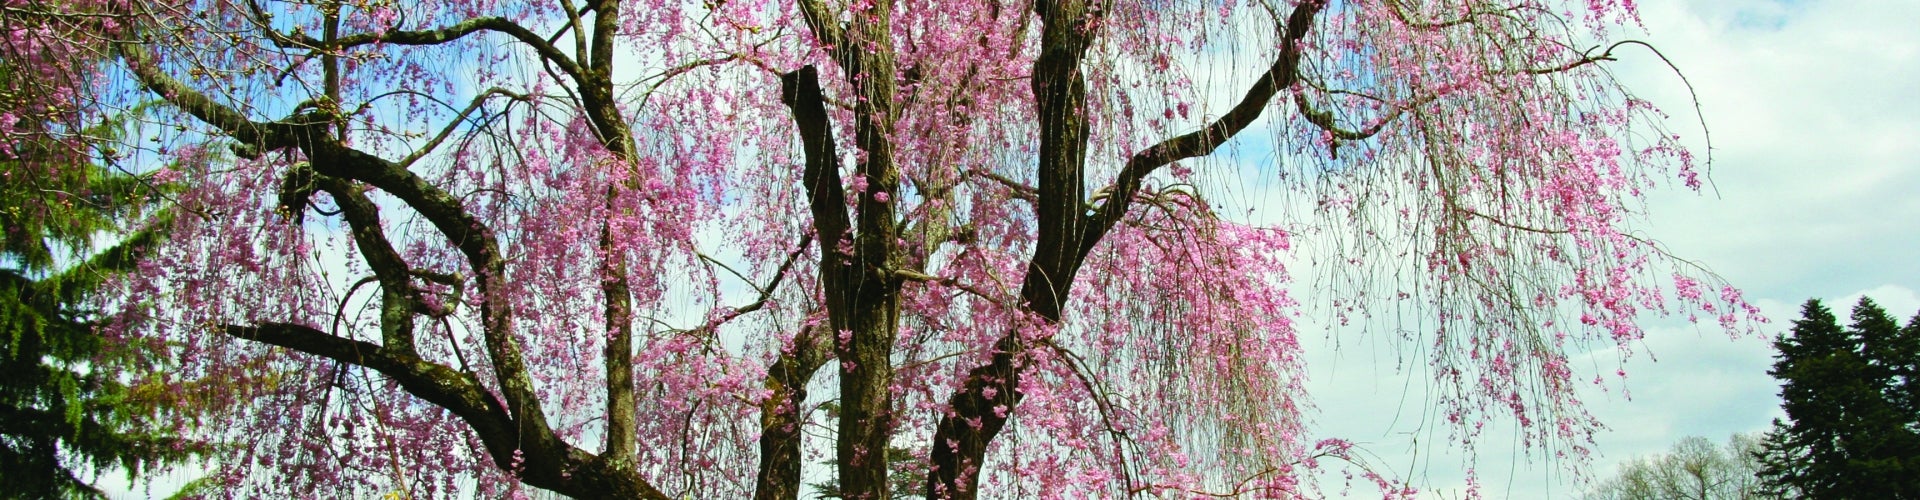 A cherry tree in bloom with pink blossoms. 